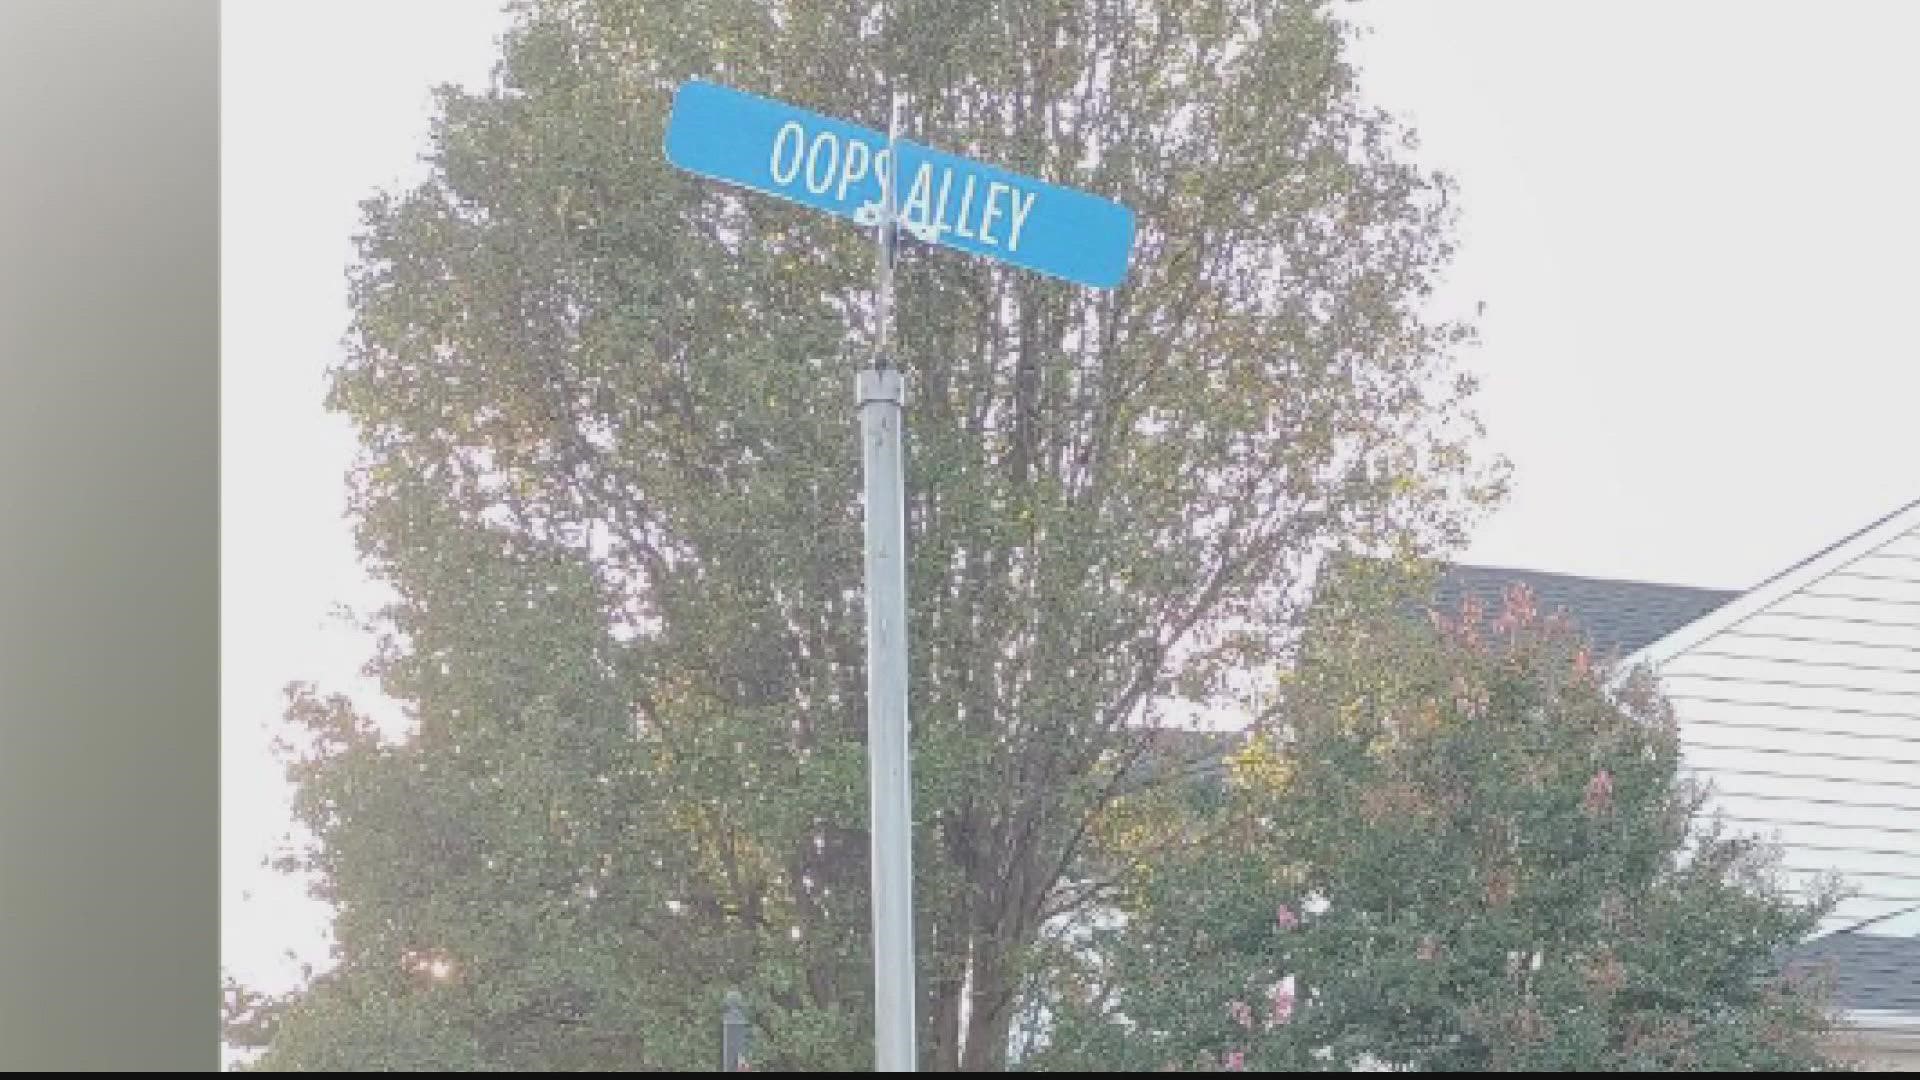 Virginia is home to a street sign that may be a mistake or just hilarious. It's tonight's greatest hit.